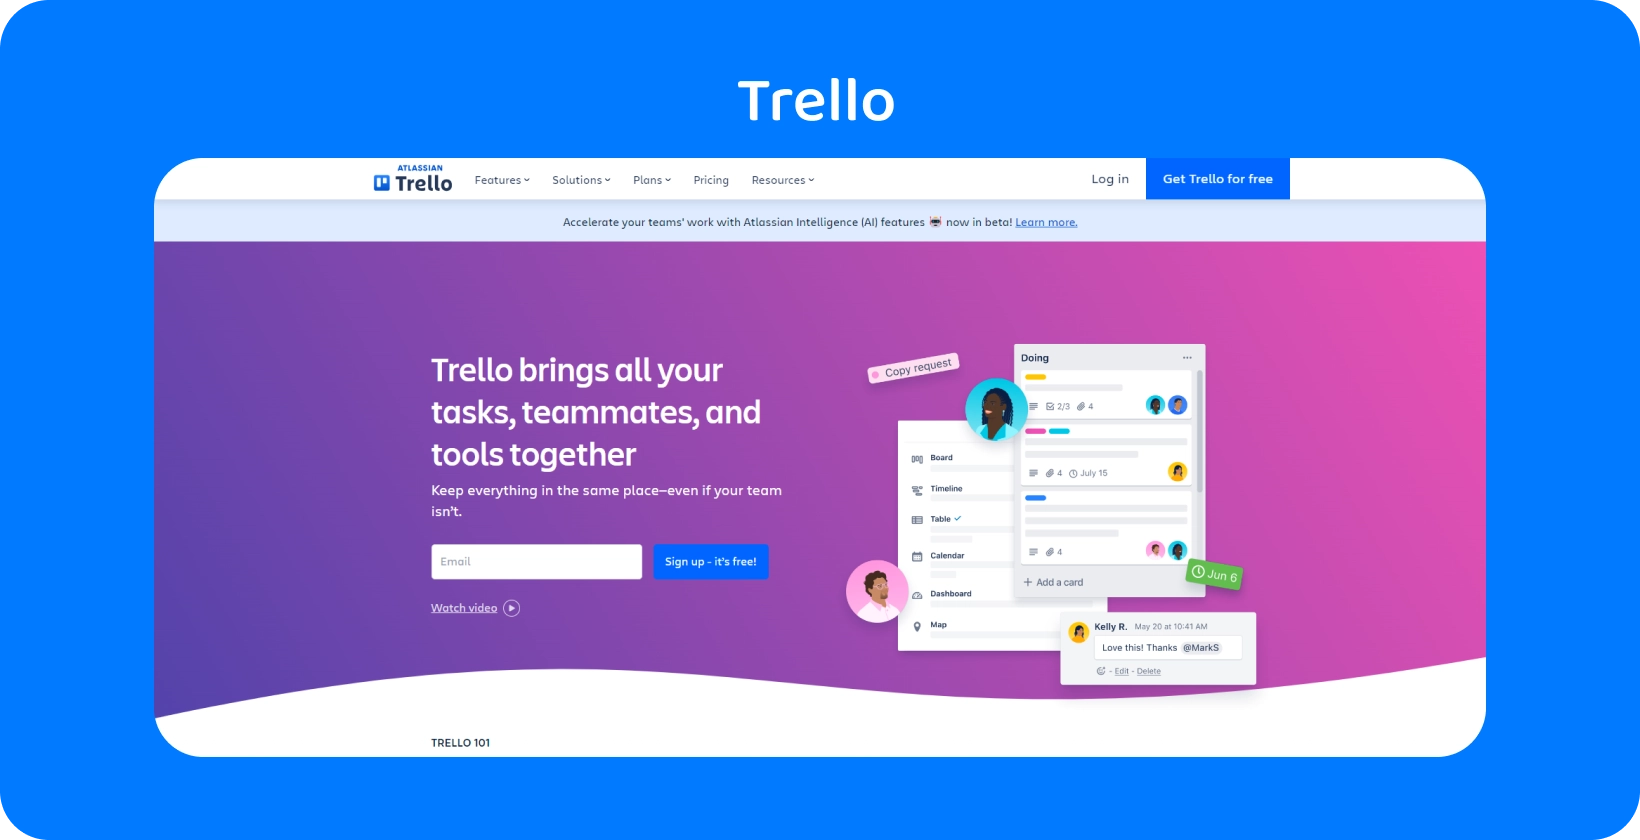 A Trello interface showing task organization, perfect for lawyers to manage the case files and collaborations.